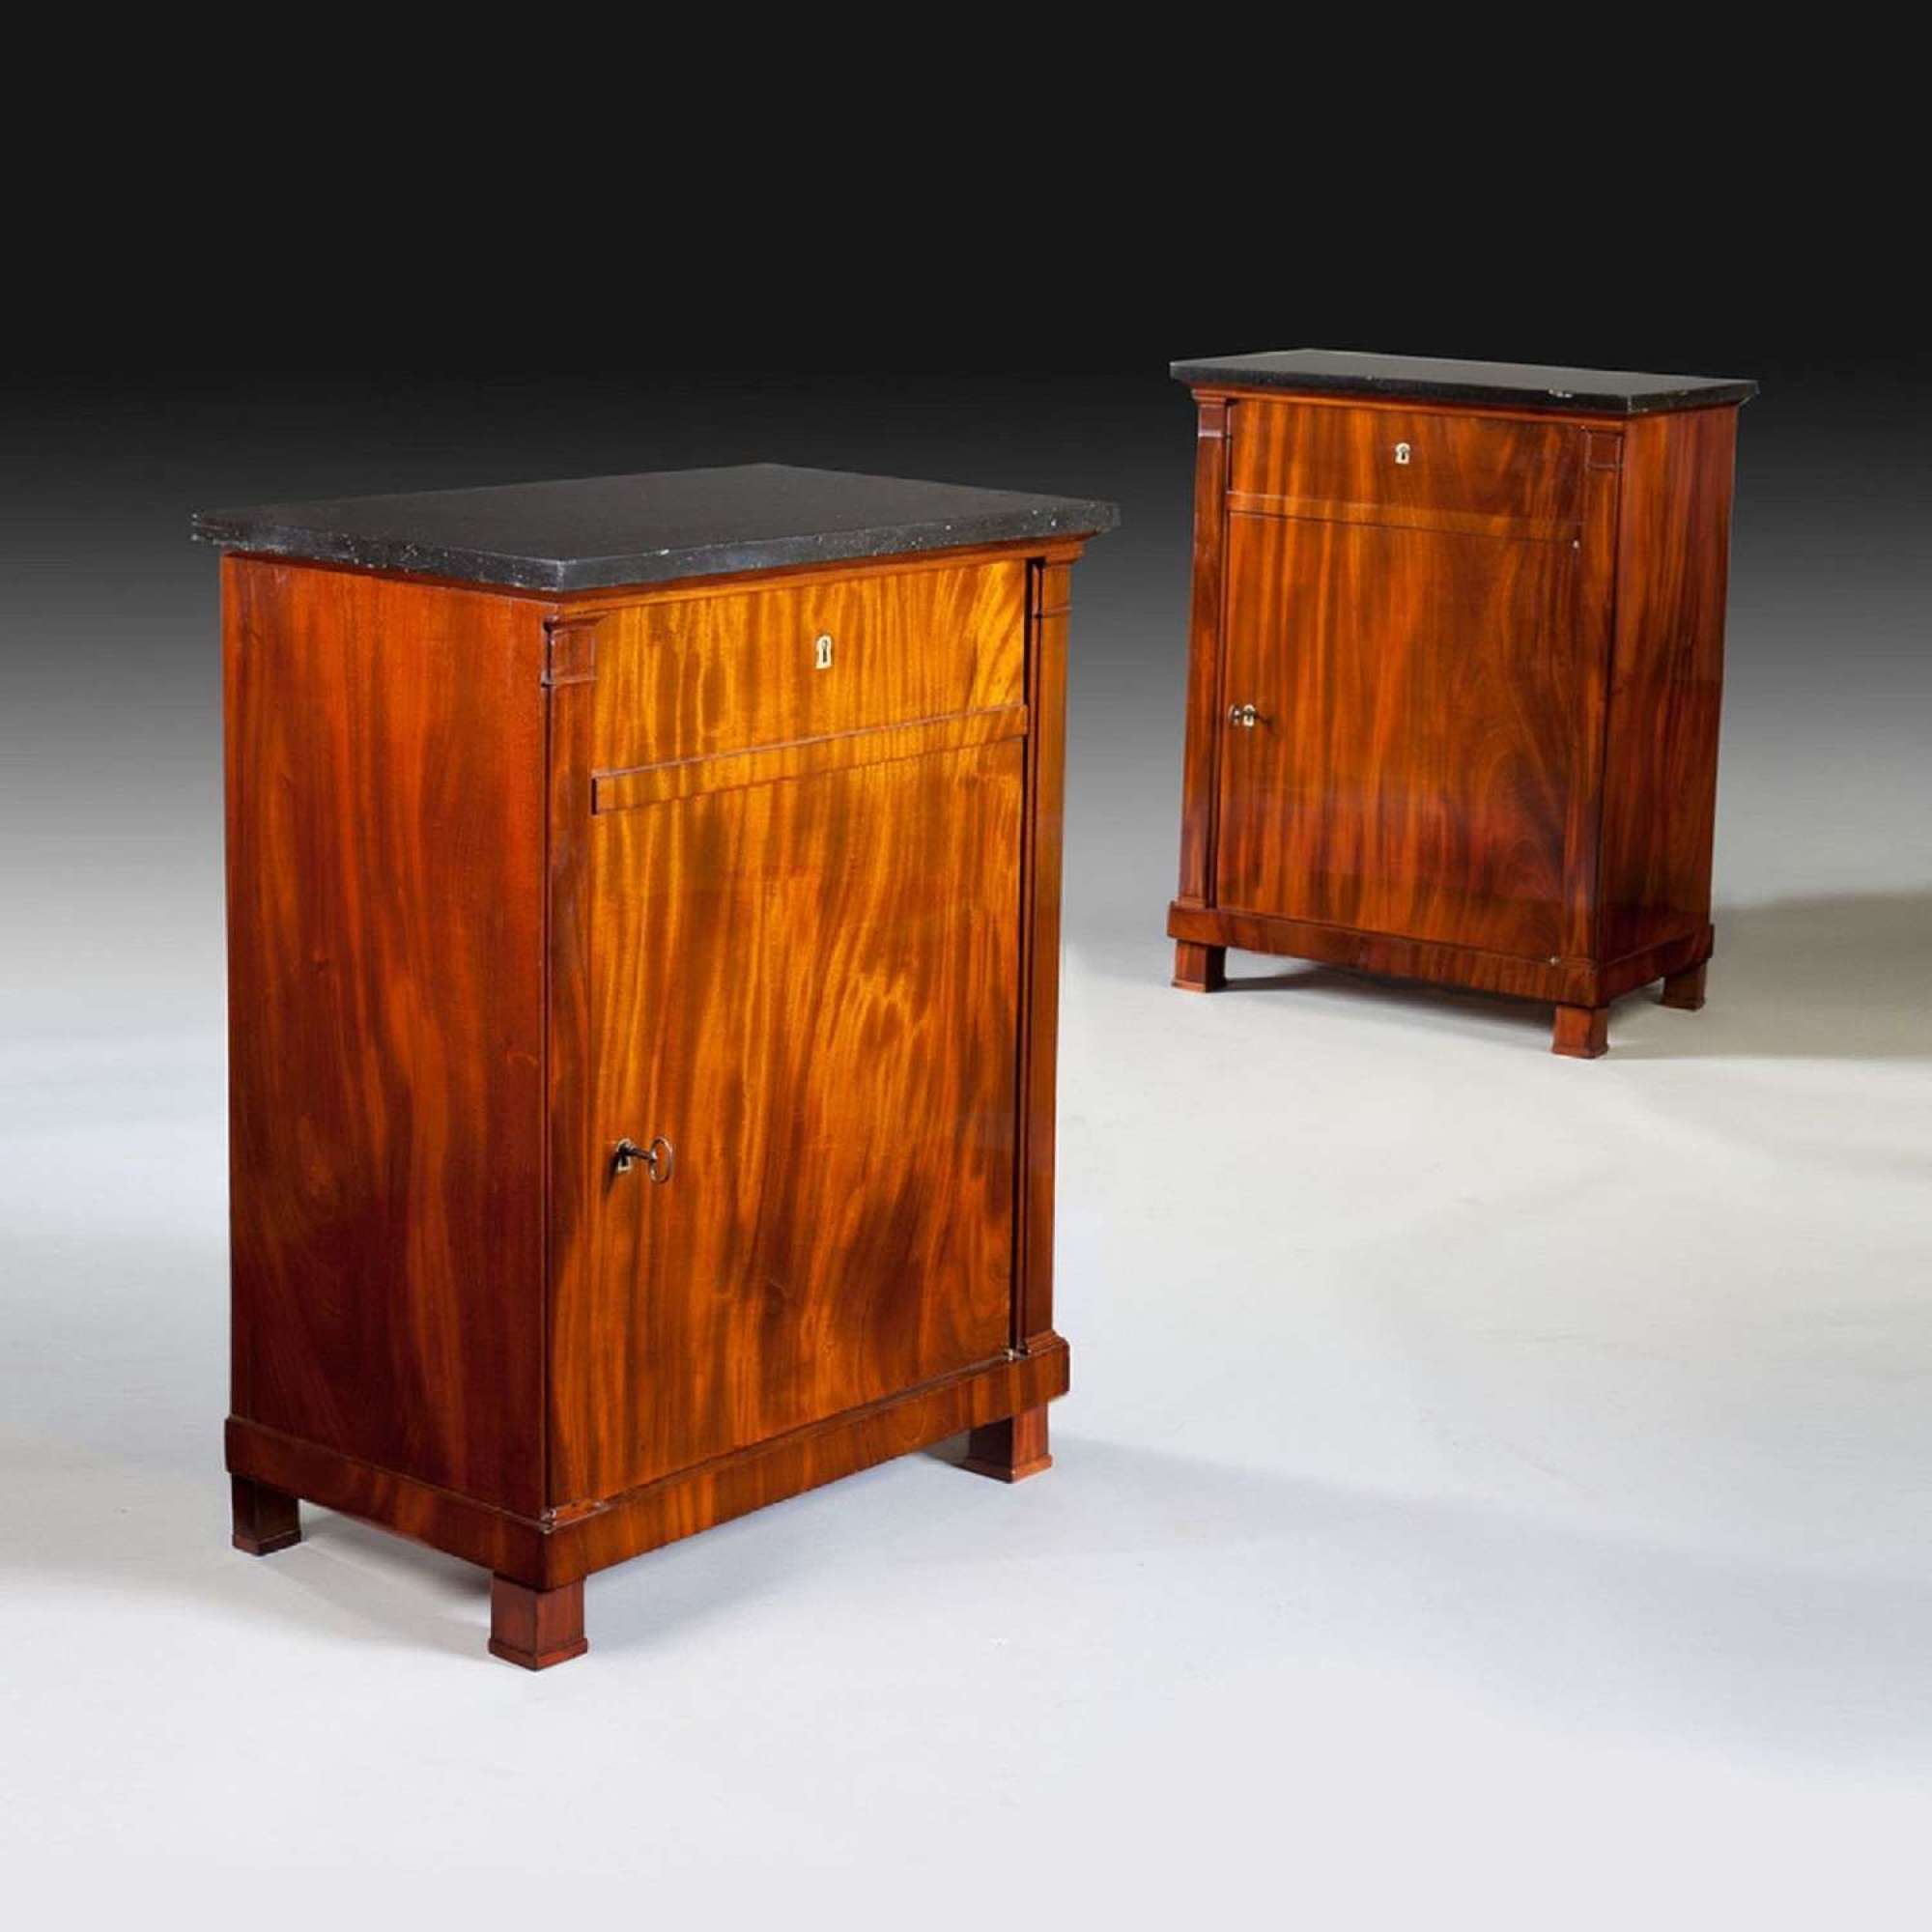 A pair of early 19th century Empire cabinets